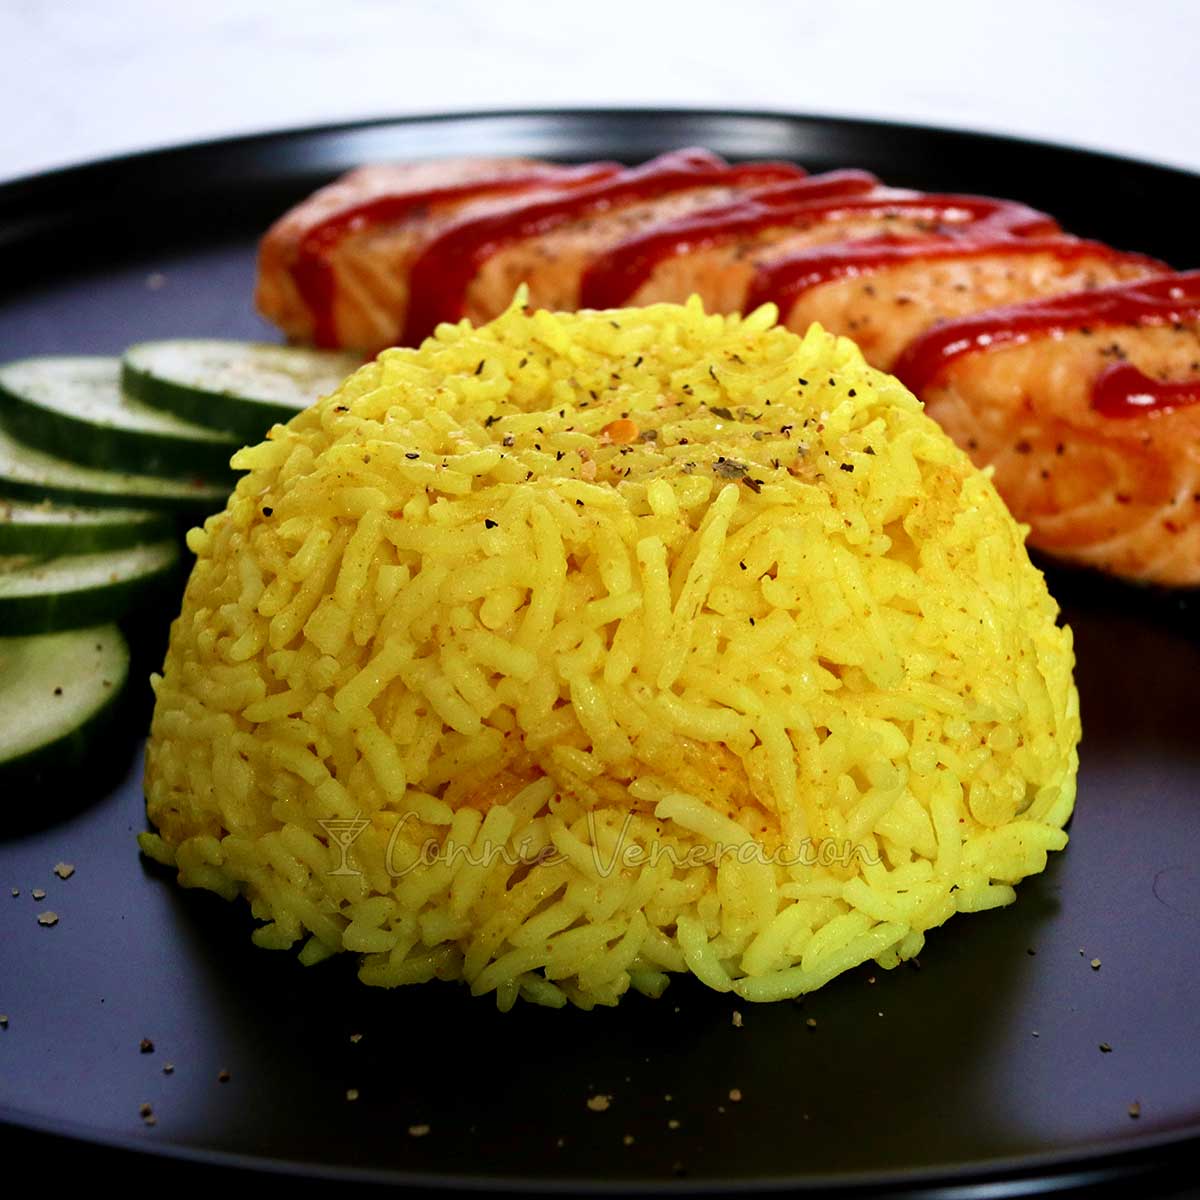 Indonesian yellow rice (nasi kuning) with fish and cucumbers on the side